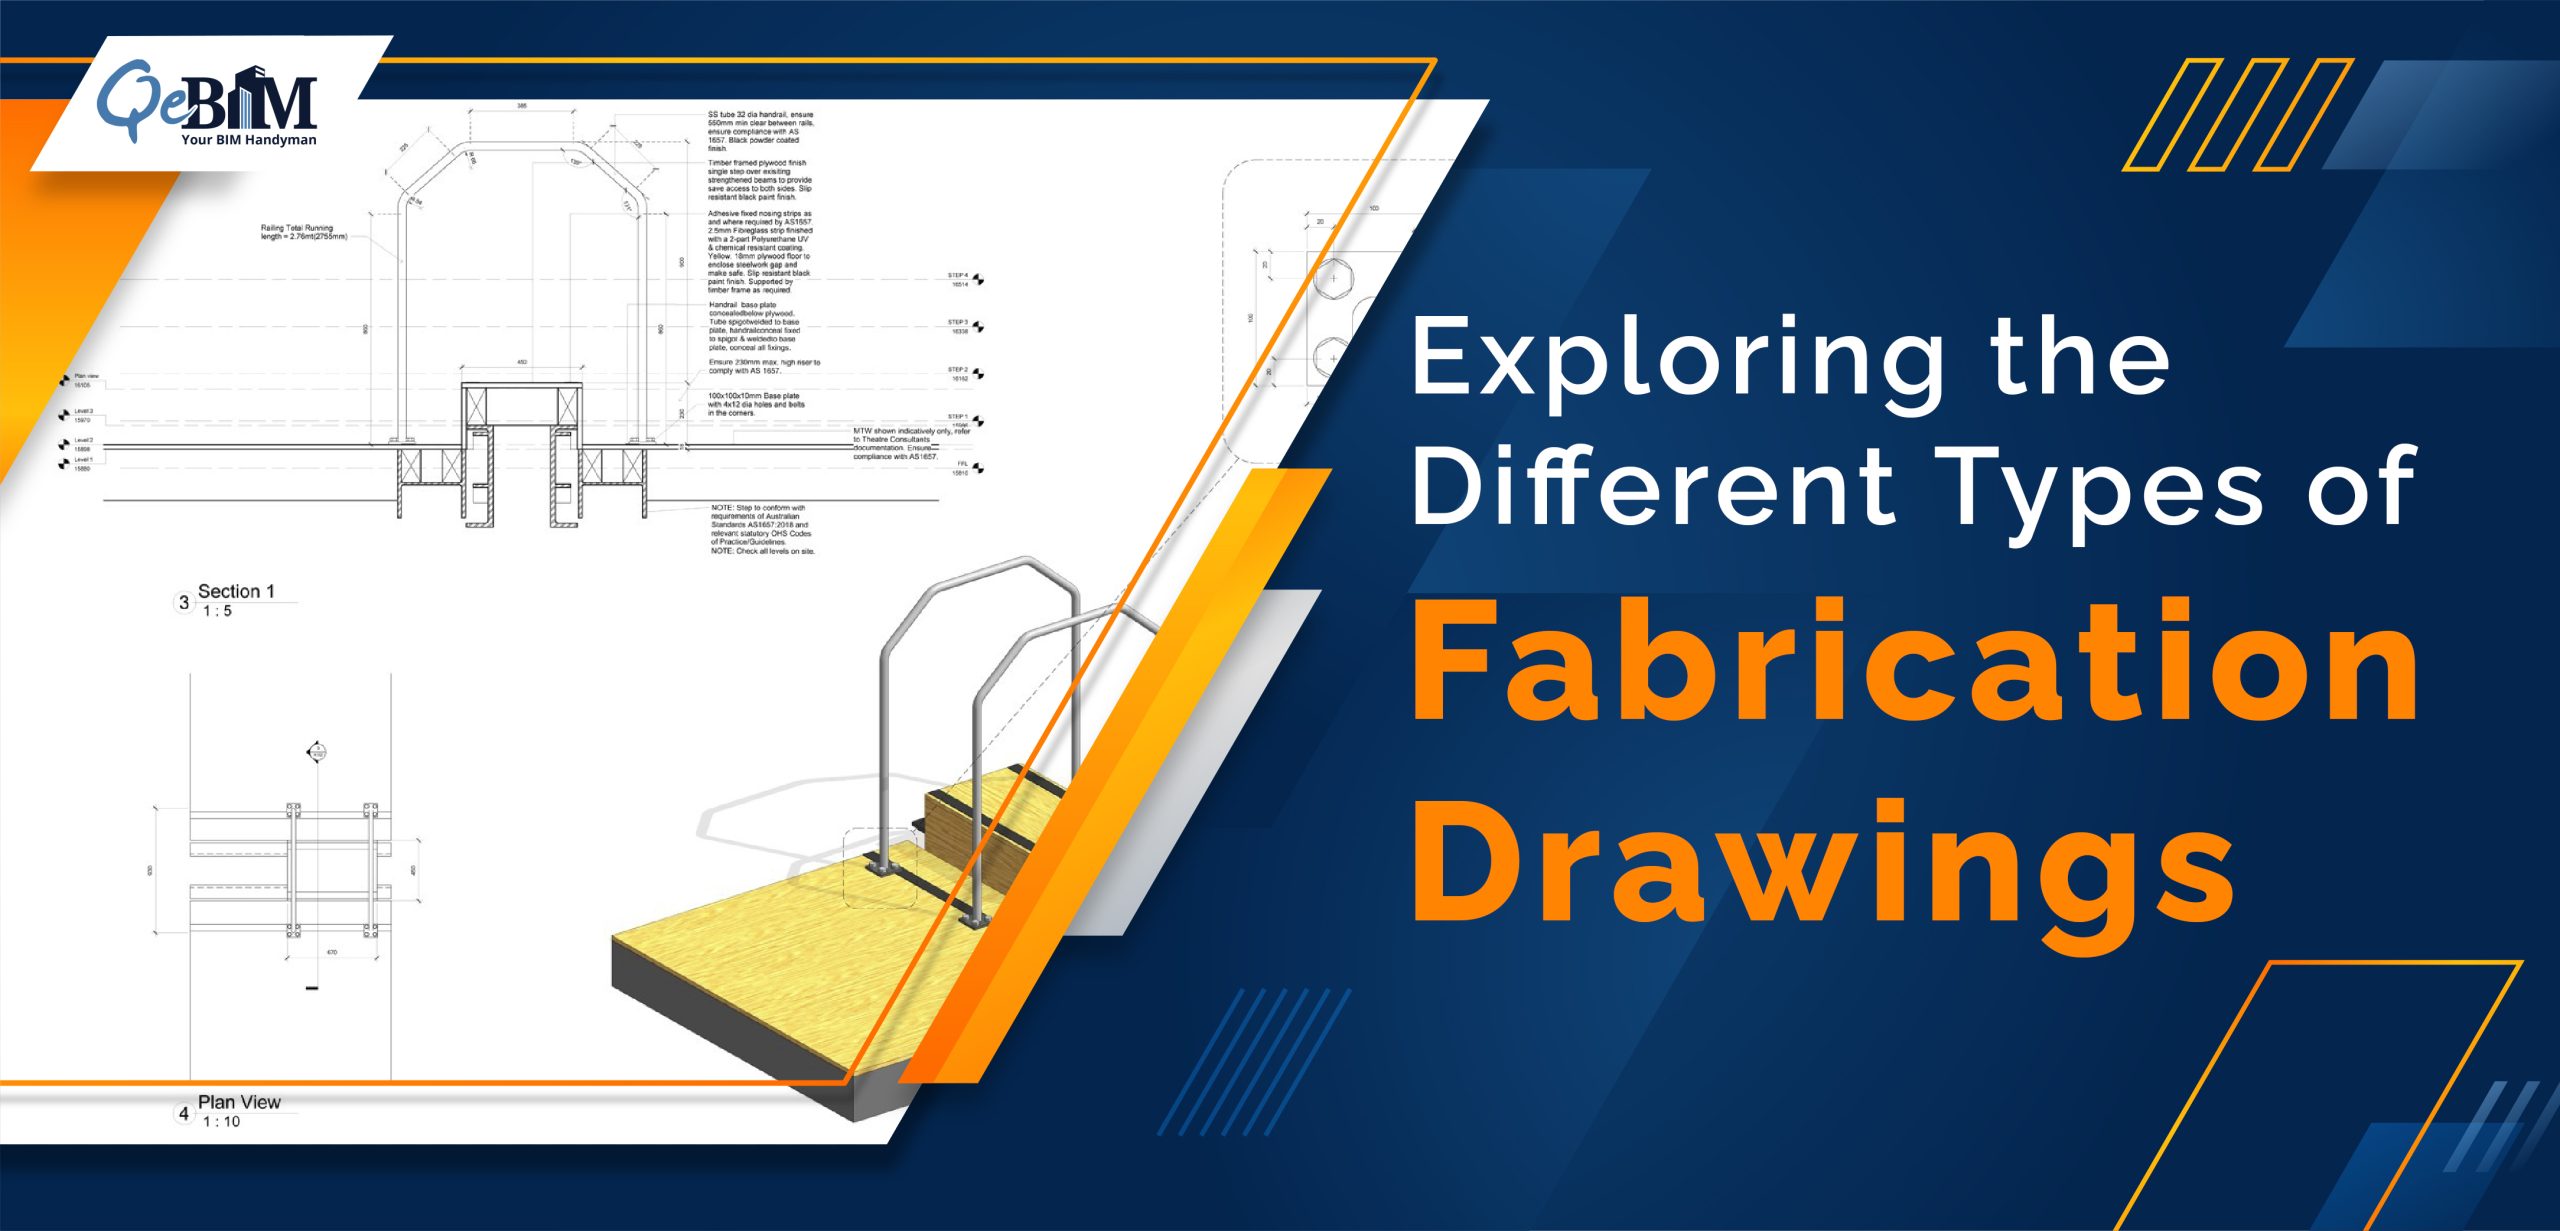 Exploring the Different Types of Fabrication Drawing